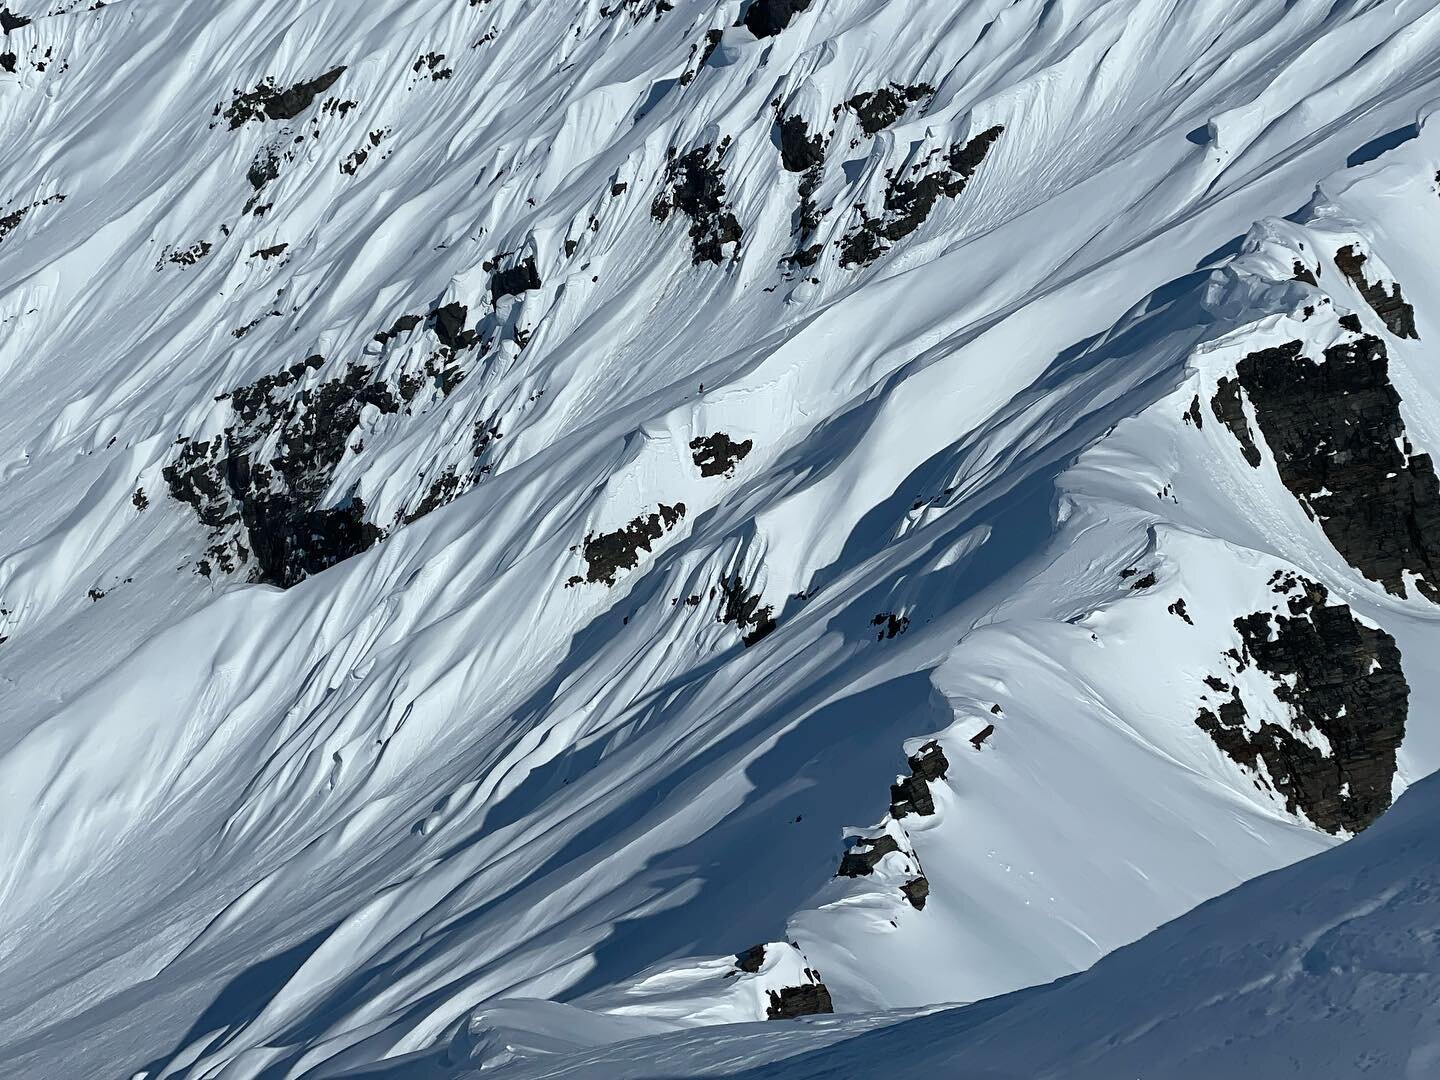 Can you see @simon.hillis in this sea of spines?!? Hell of a way to pop your AK cherry bud! We can&rsquo;t wait to see you smash pow in style for years to come!

@volklskisusa @hellyhansen 
@hellyhansenski @prethelmets @bolle_eyewear @fitssocks 
@pow